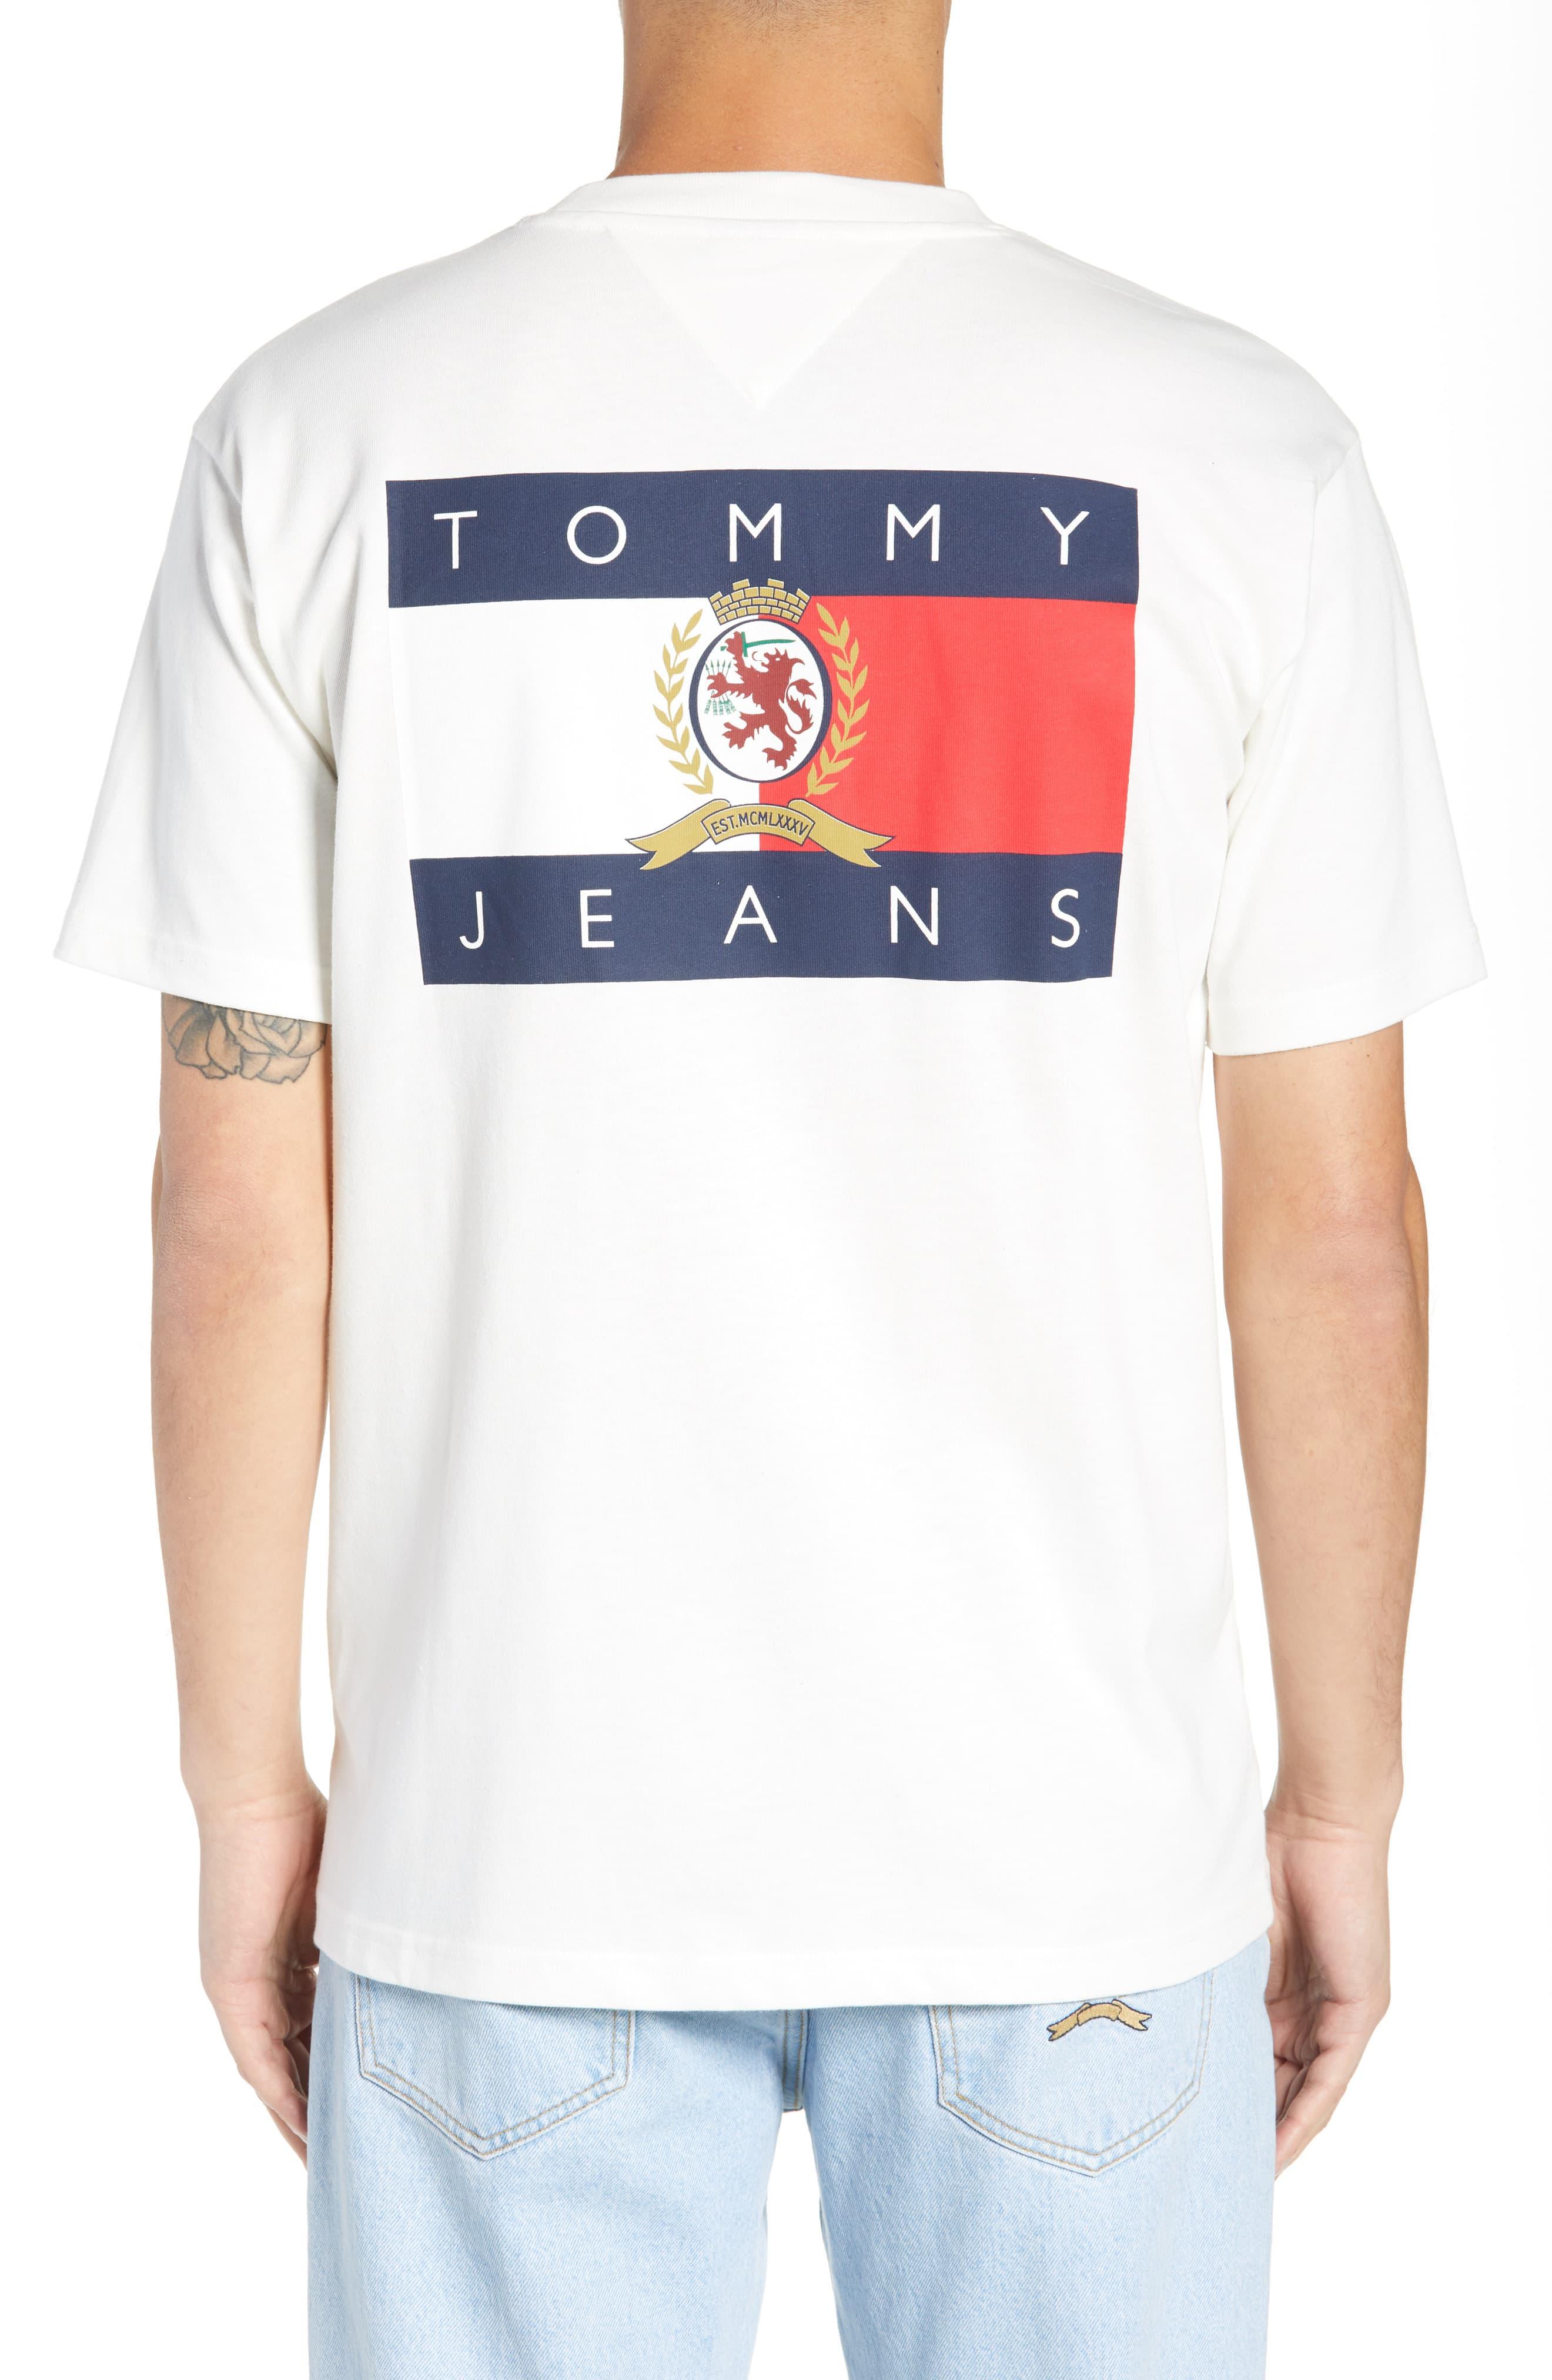 Crest Flag Tee Tommy Jeans Shop - tundraecology.hi.is 1694310235